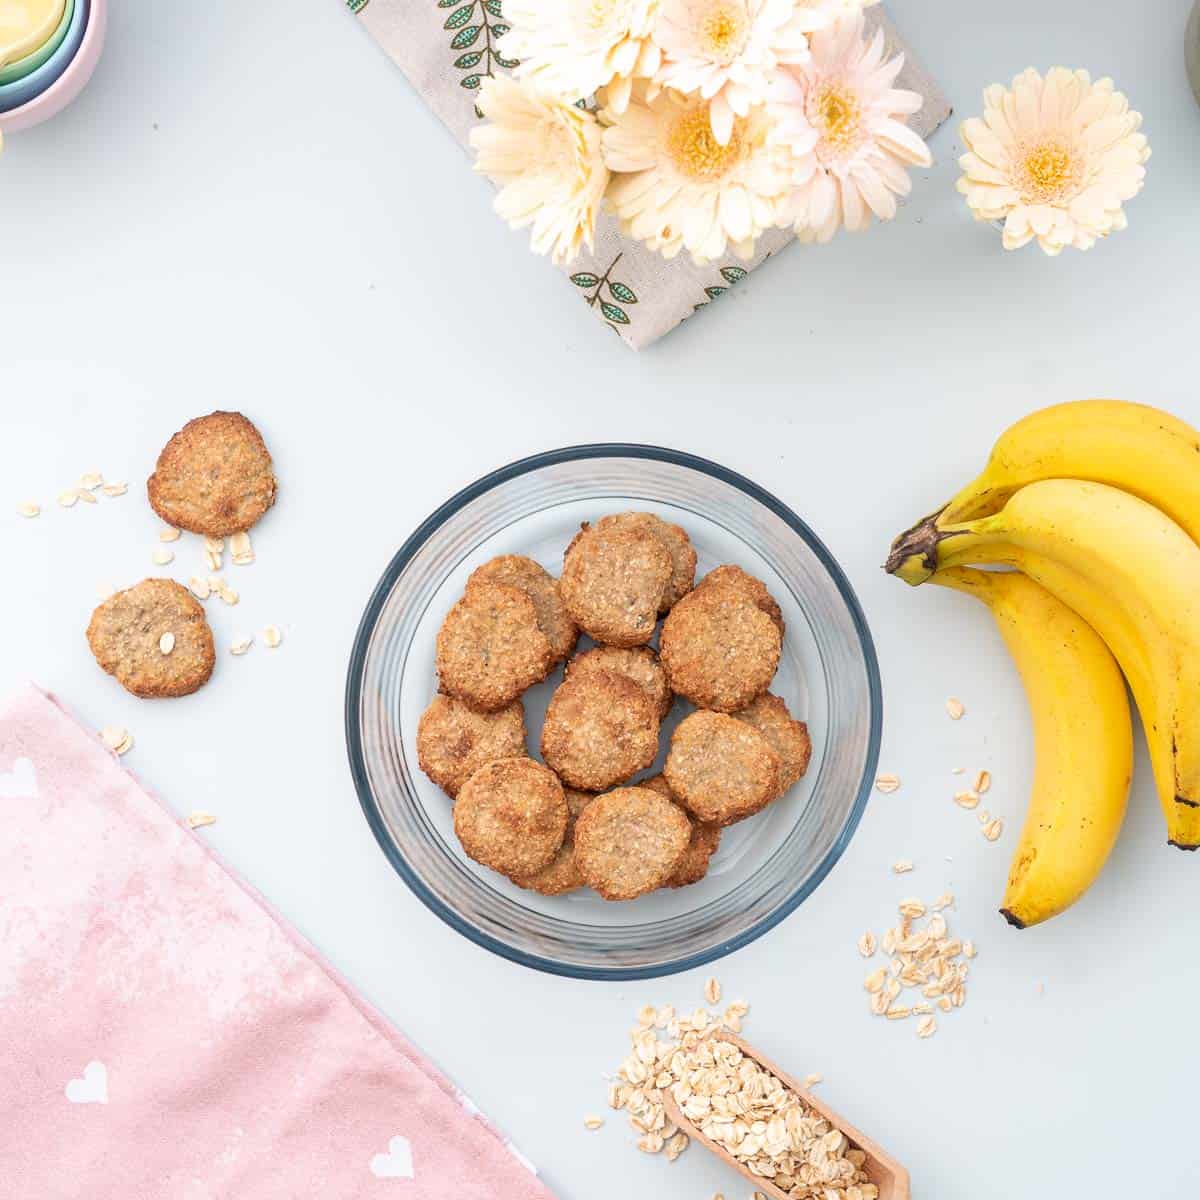 A round glass container full of oatmeal cookies on a bench next to a bunch of bananas.